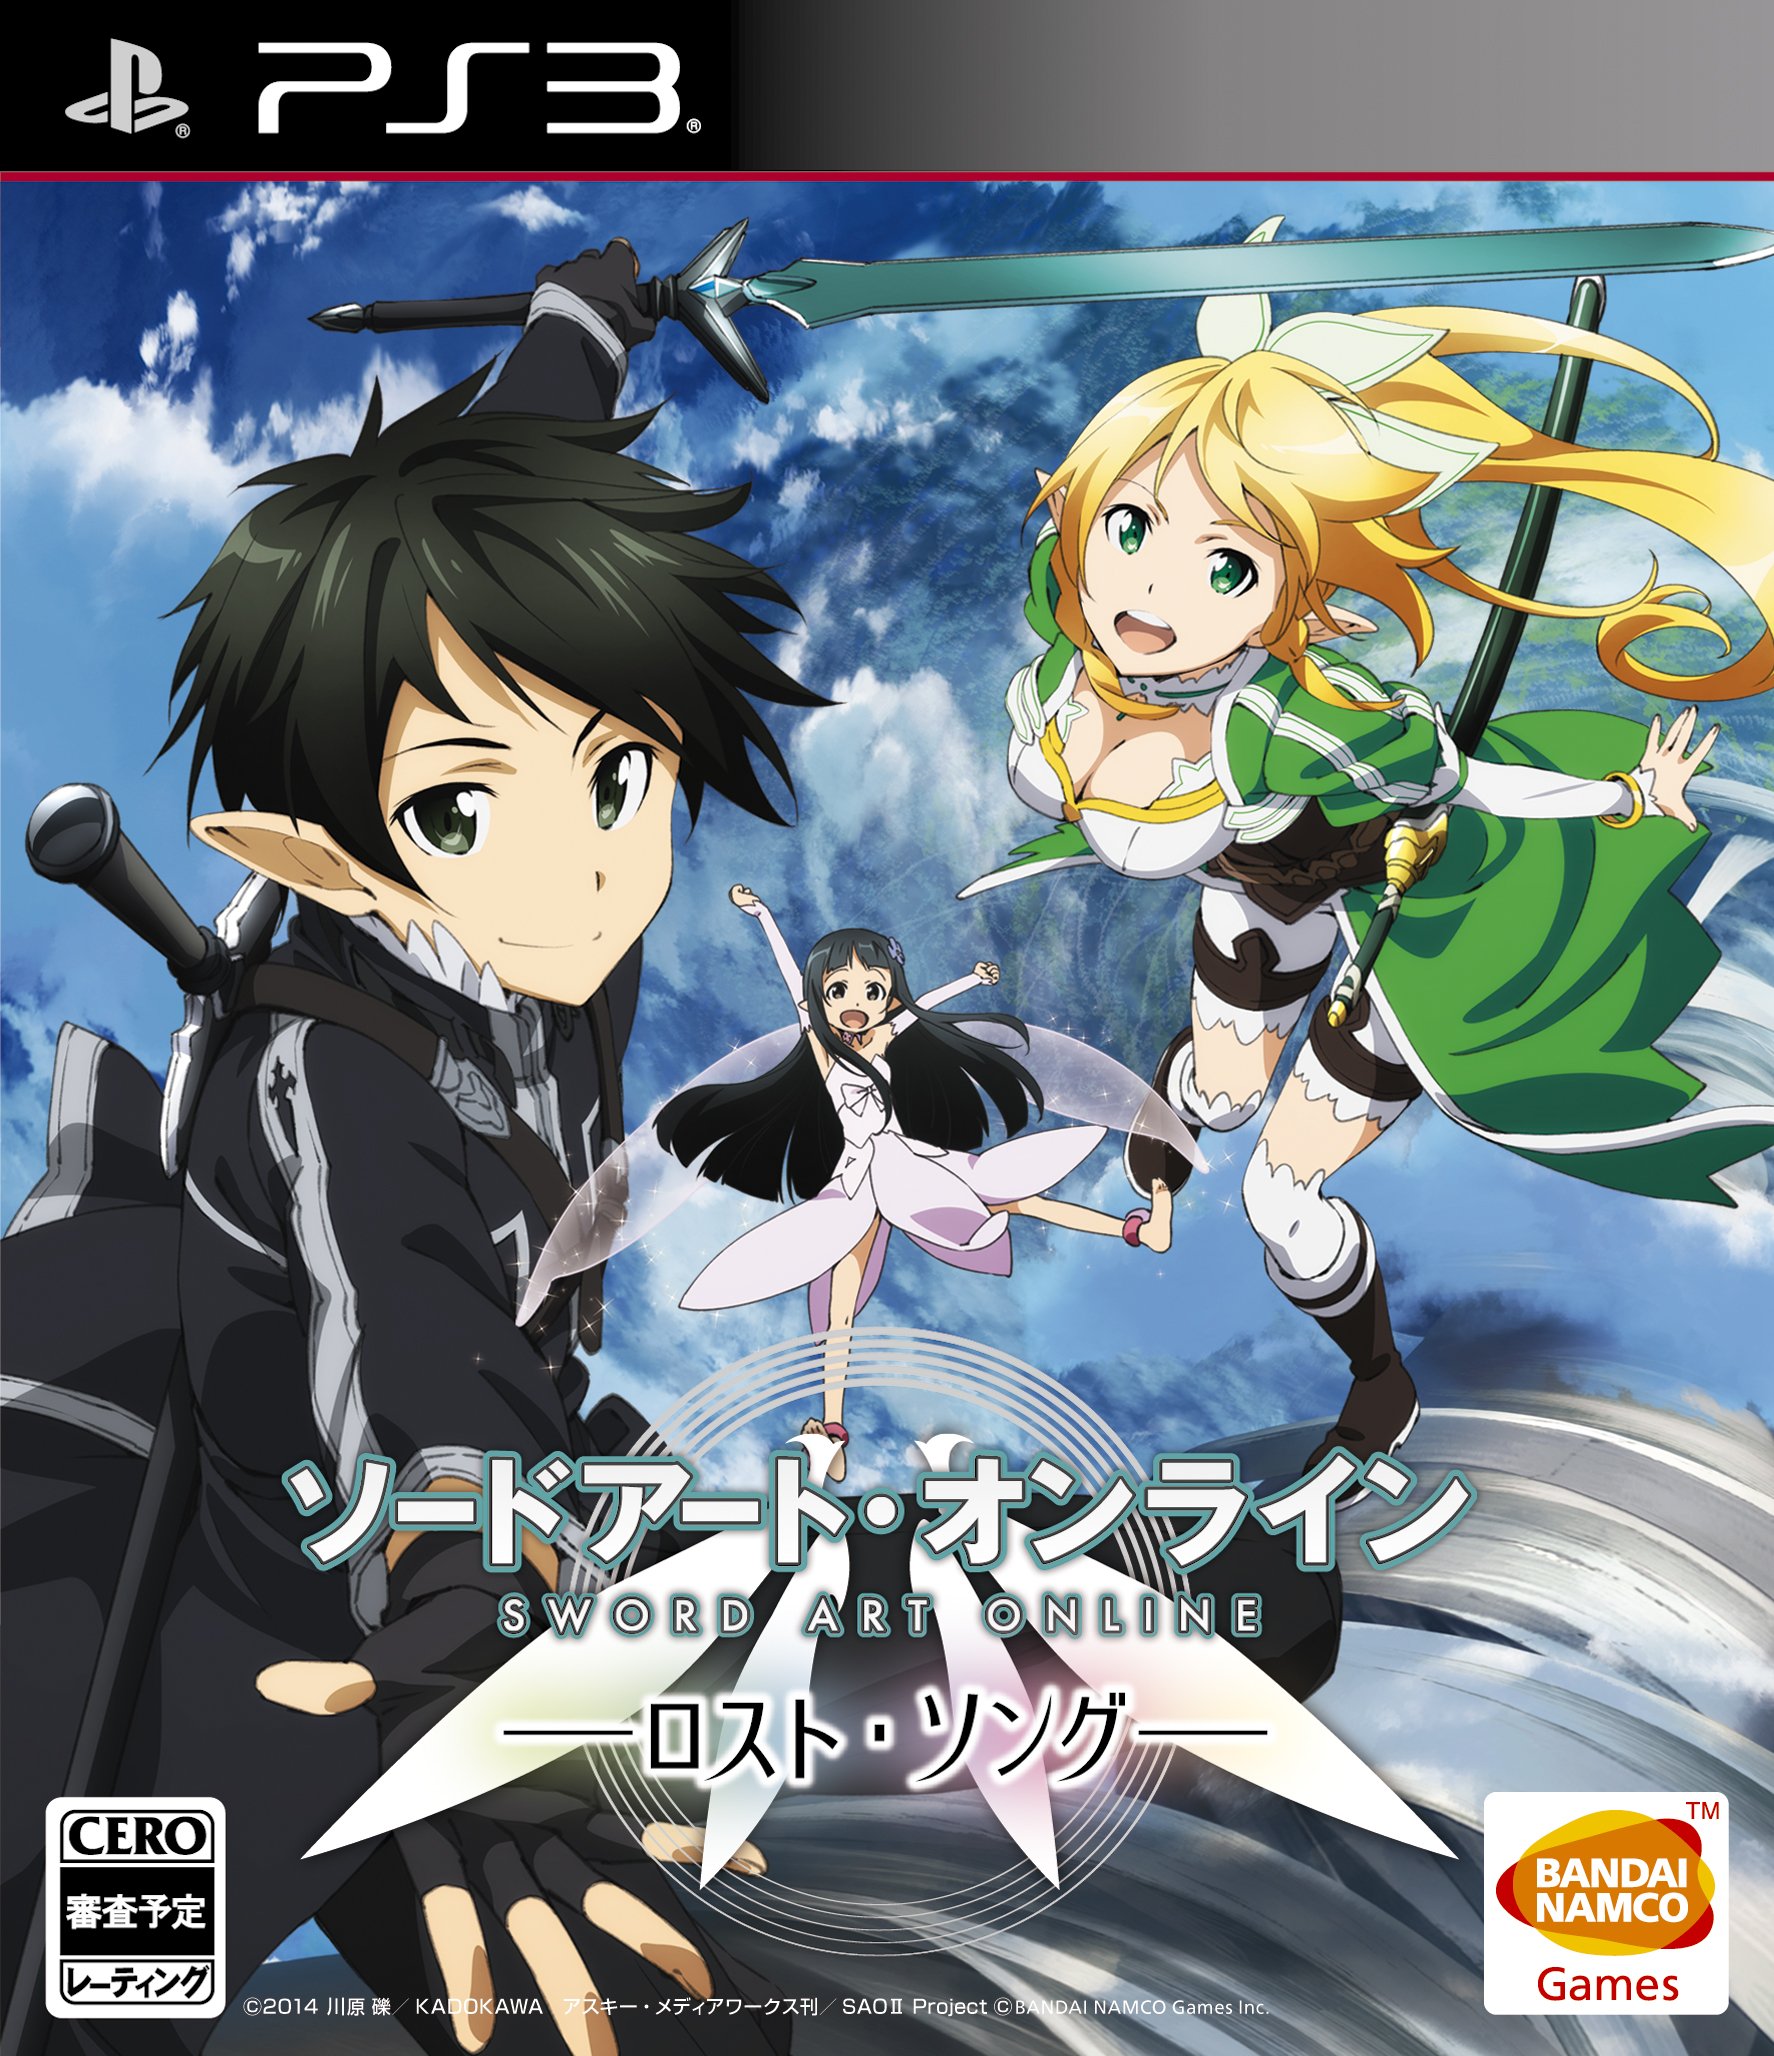 Sword Art Online - Lost Song - (product code shipped the item that can be used within the Limited bonus game is released)